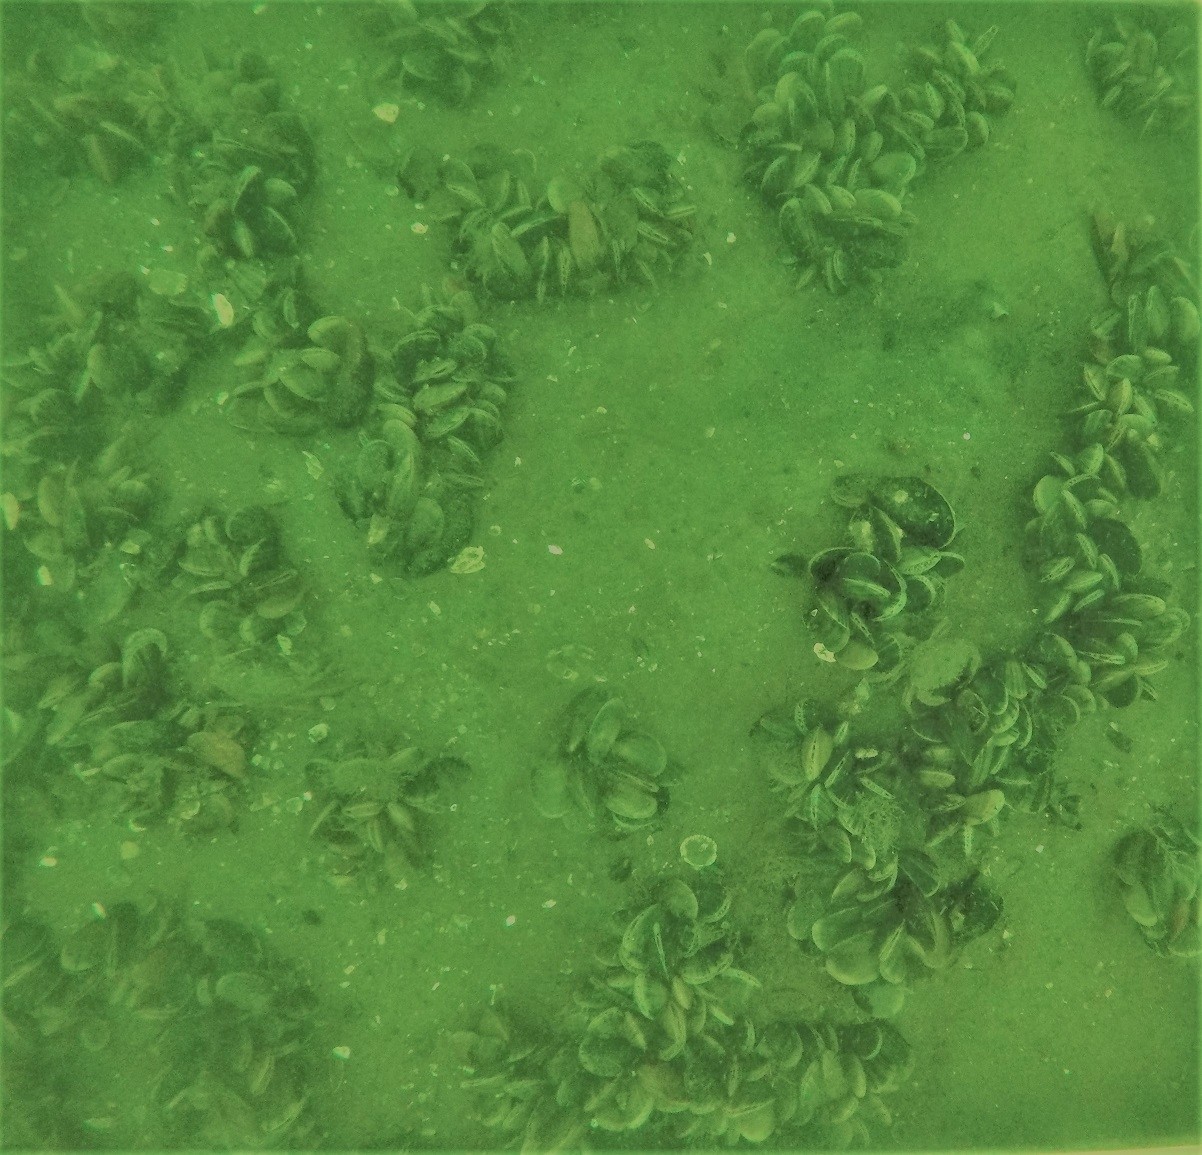 Example of mussels patterning on subtidal mussel culture plot